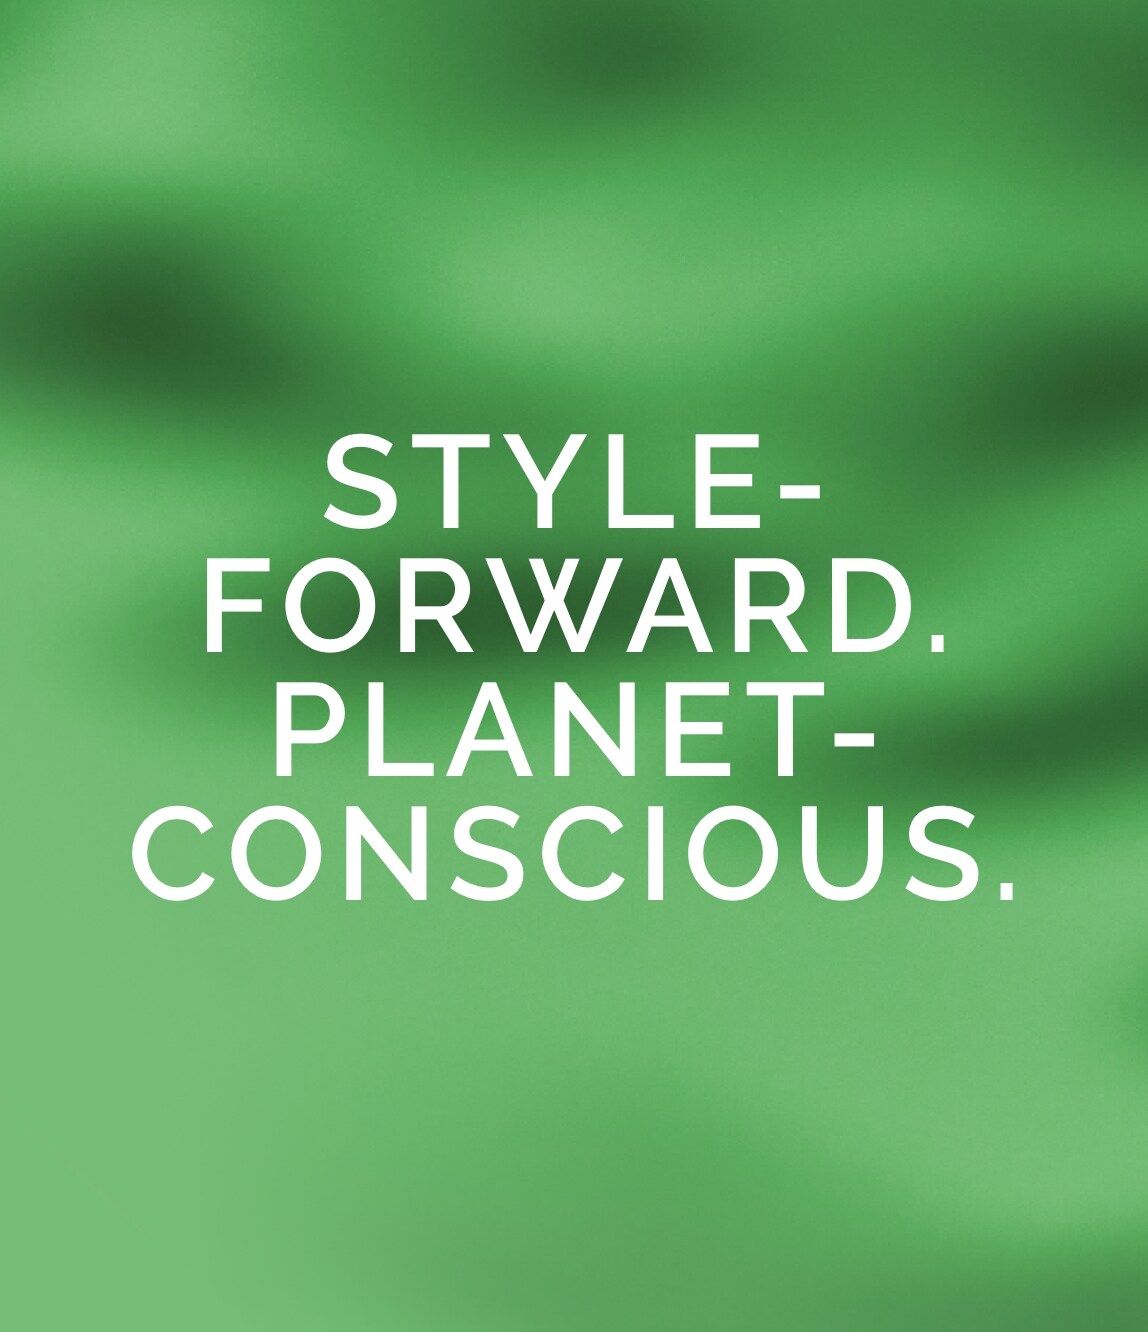 STYLE-FORWARD. PLANET-CONSCIOUS.